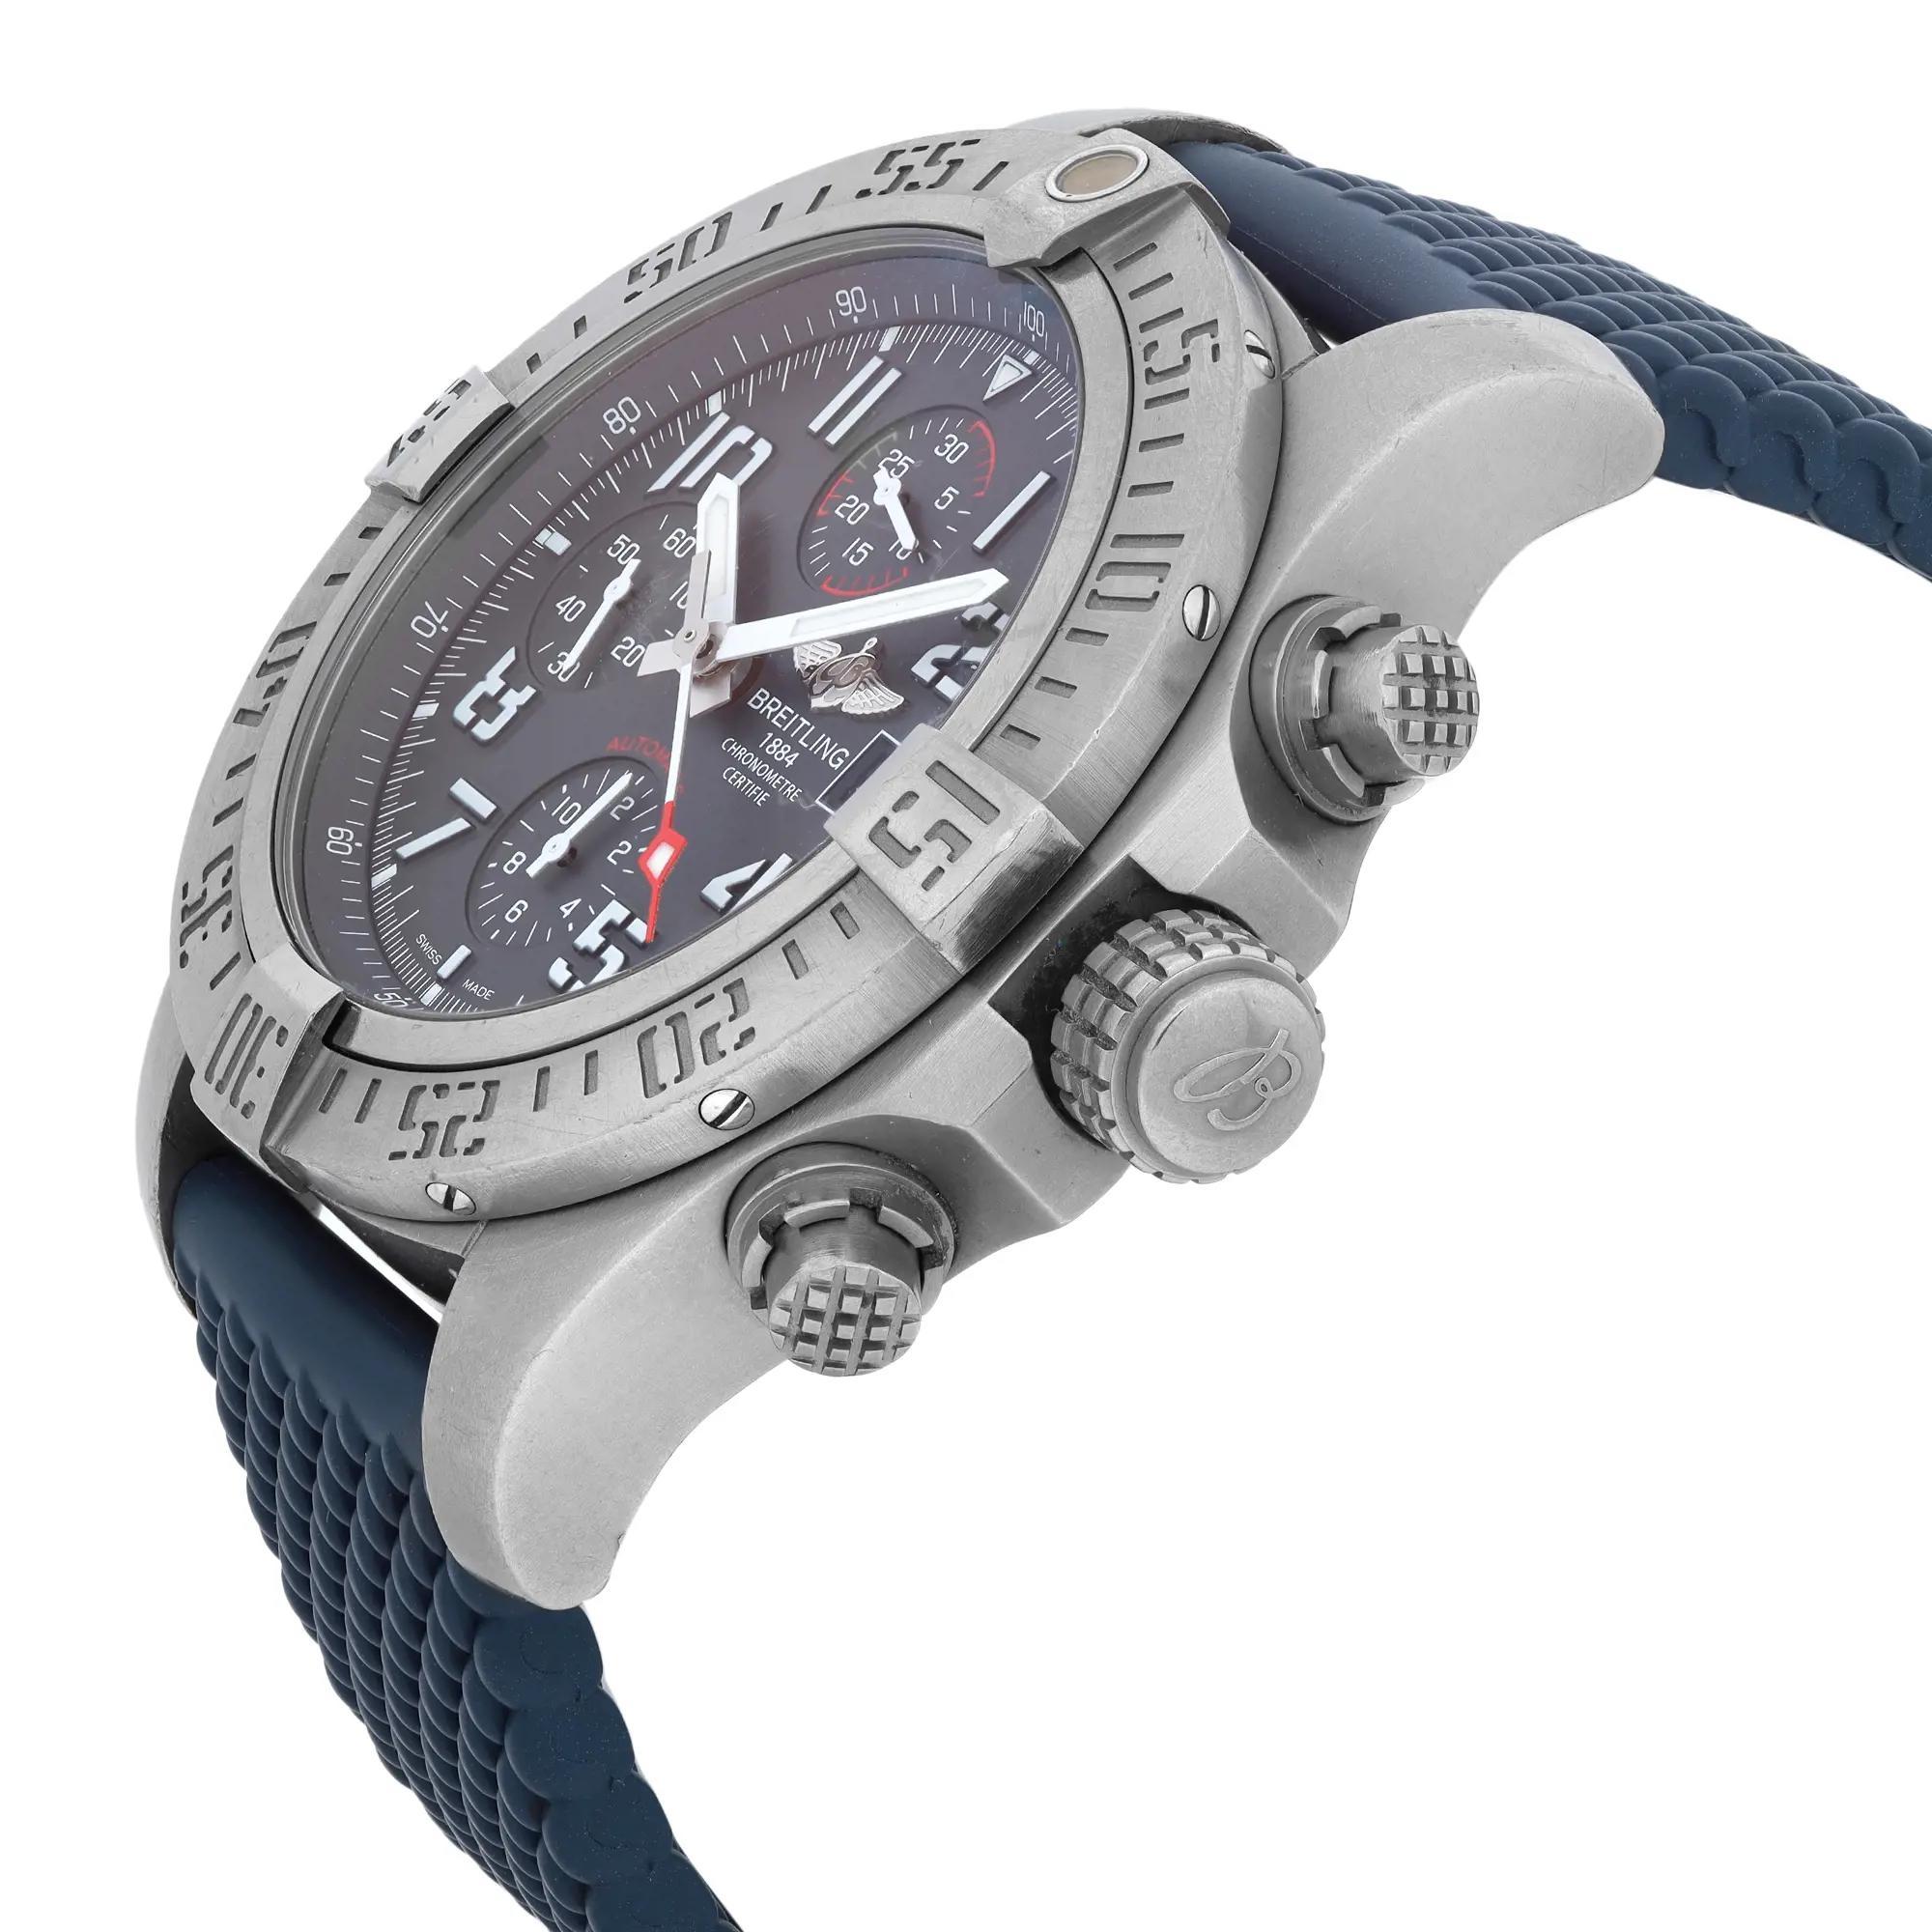 Breitling Avenger Bandit Chronograph Titanium Gray Dial Watch E1338310/M536 In Excellent Condition In New York, NY